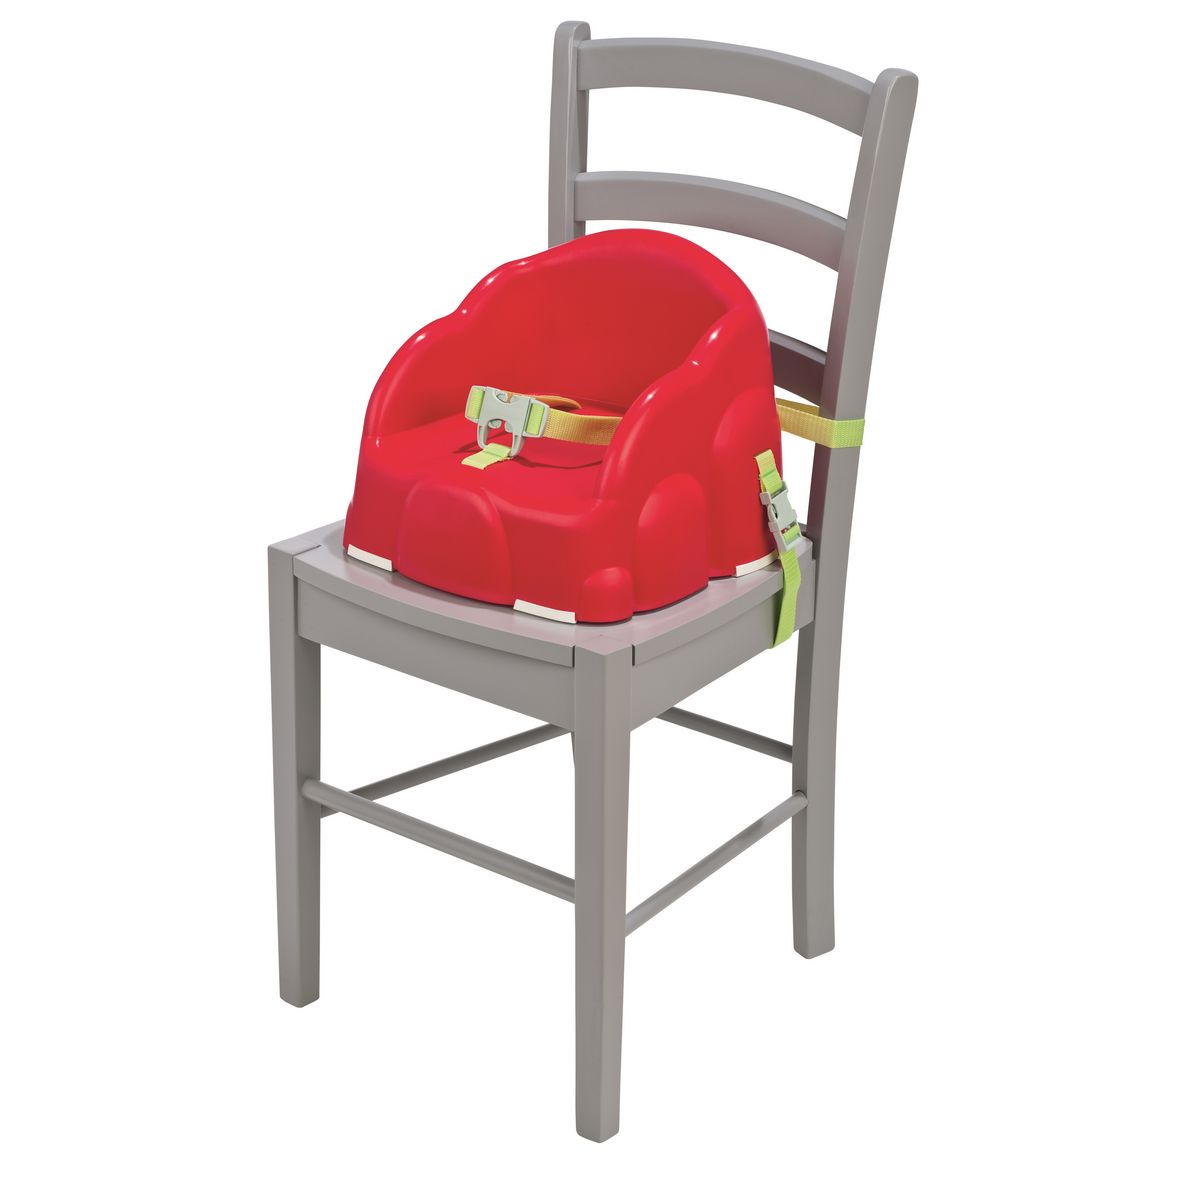 SAFETY FIRST Rehausseur de table Easy booster pas cher 